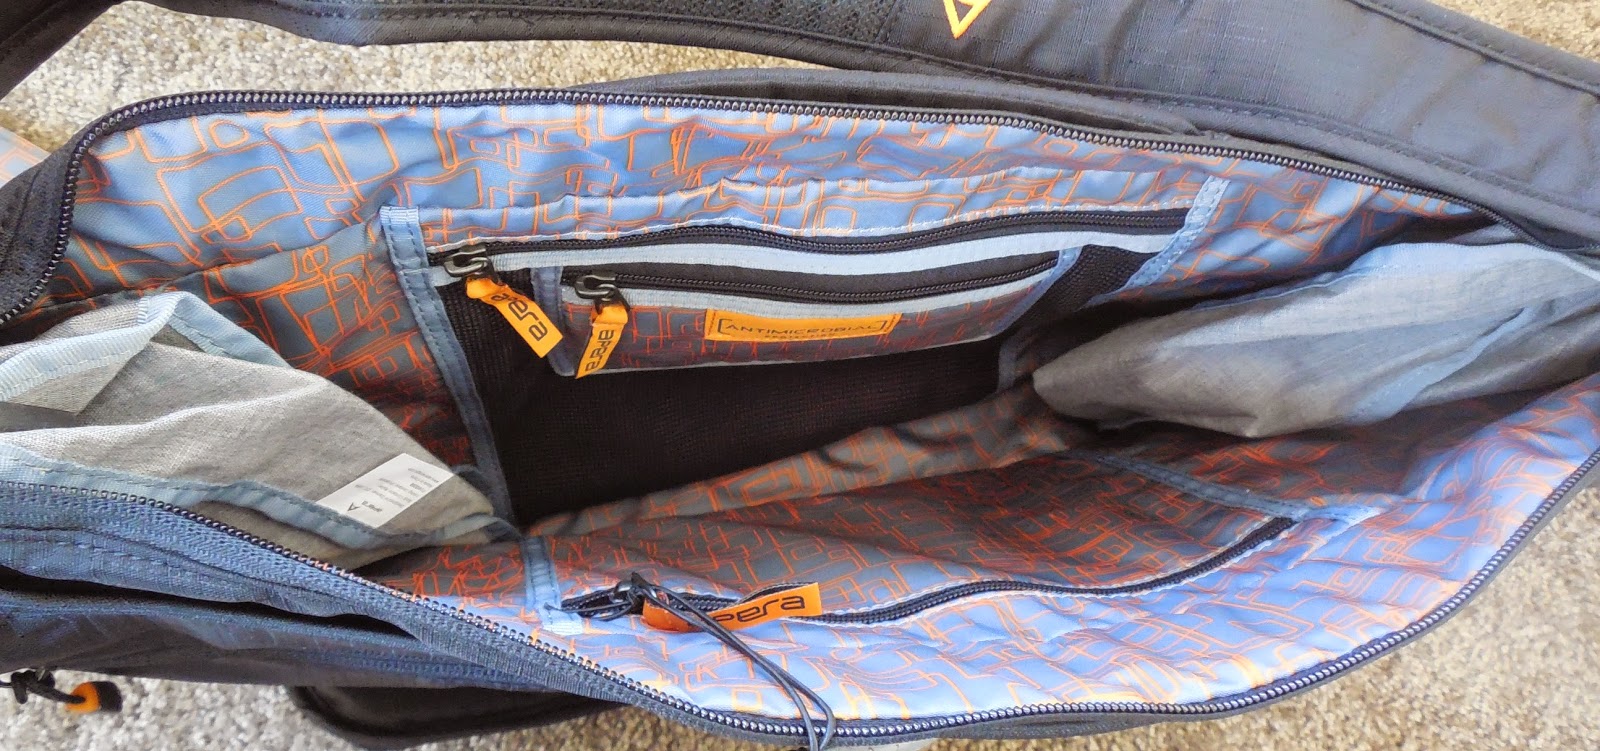 Apera Bag Review and Giveaway | The Nutritionist Reviews